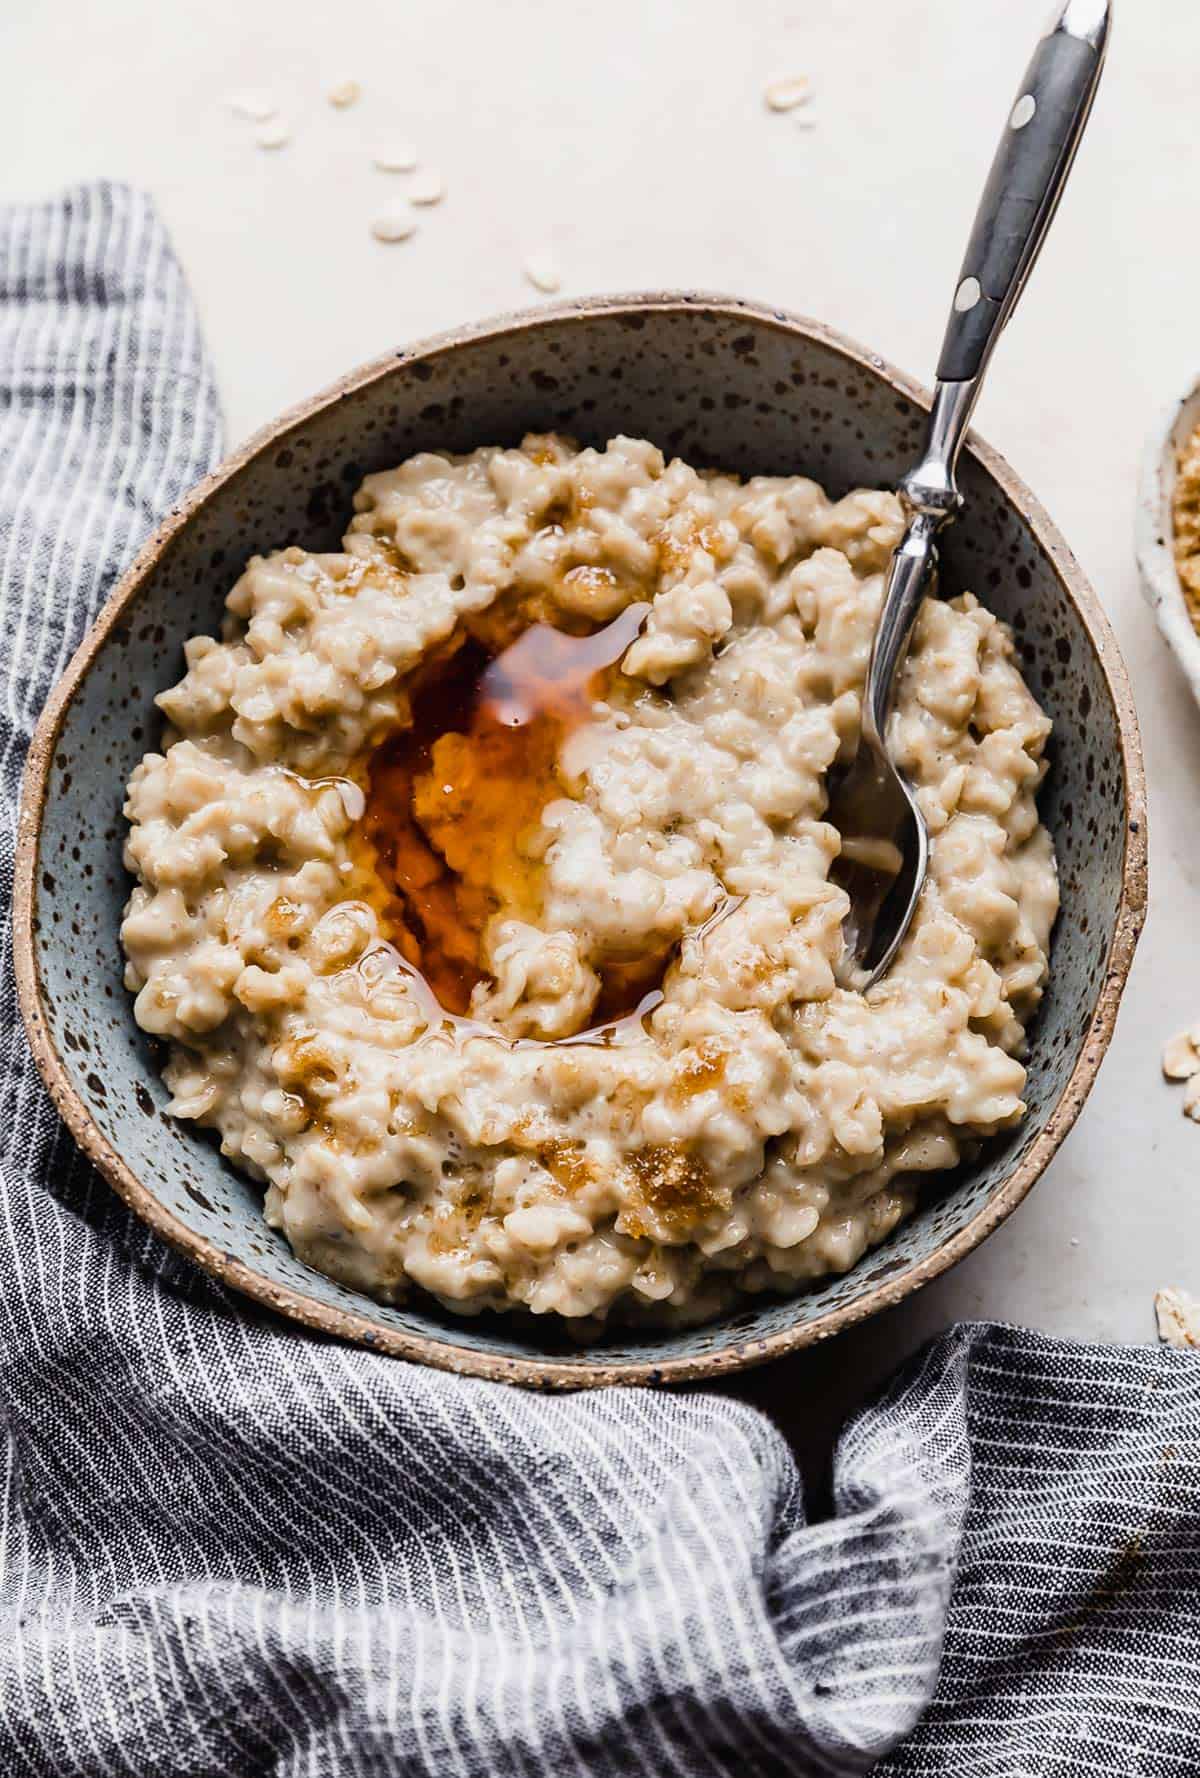 Maple and Brown Sugar Oatmeal in a blue bowl with a drizzle of maple syrup over the oatmeal.